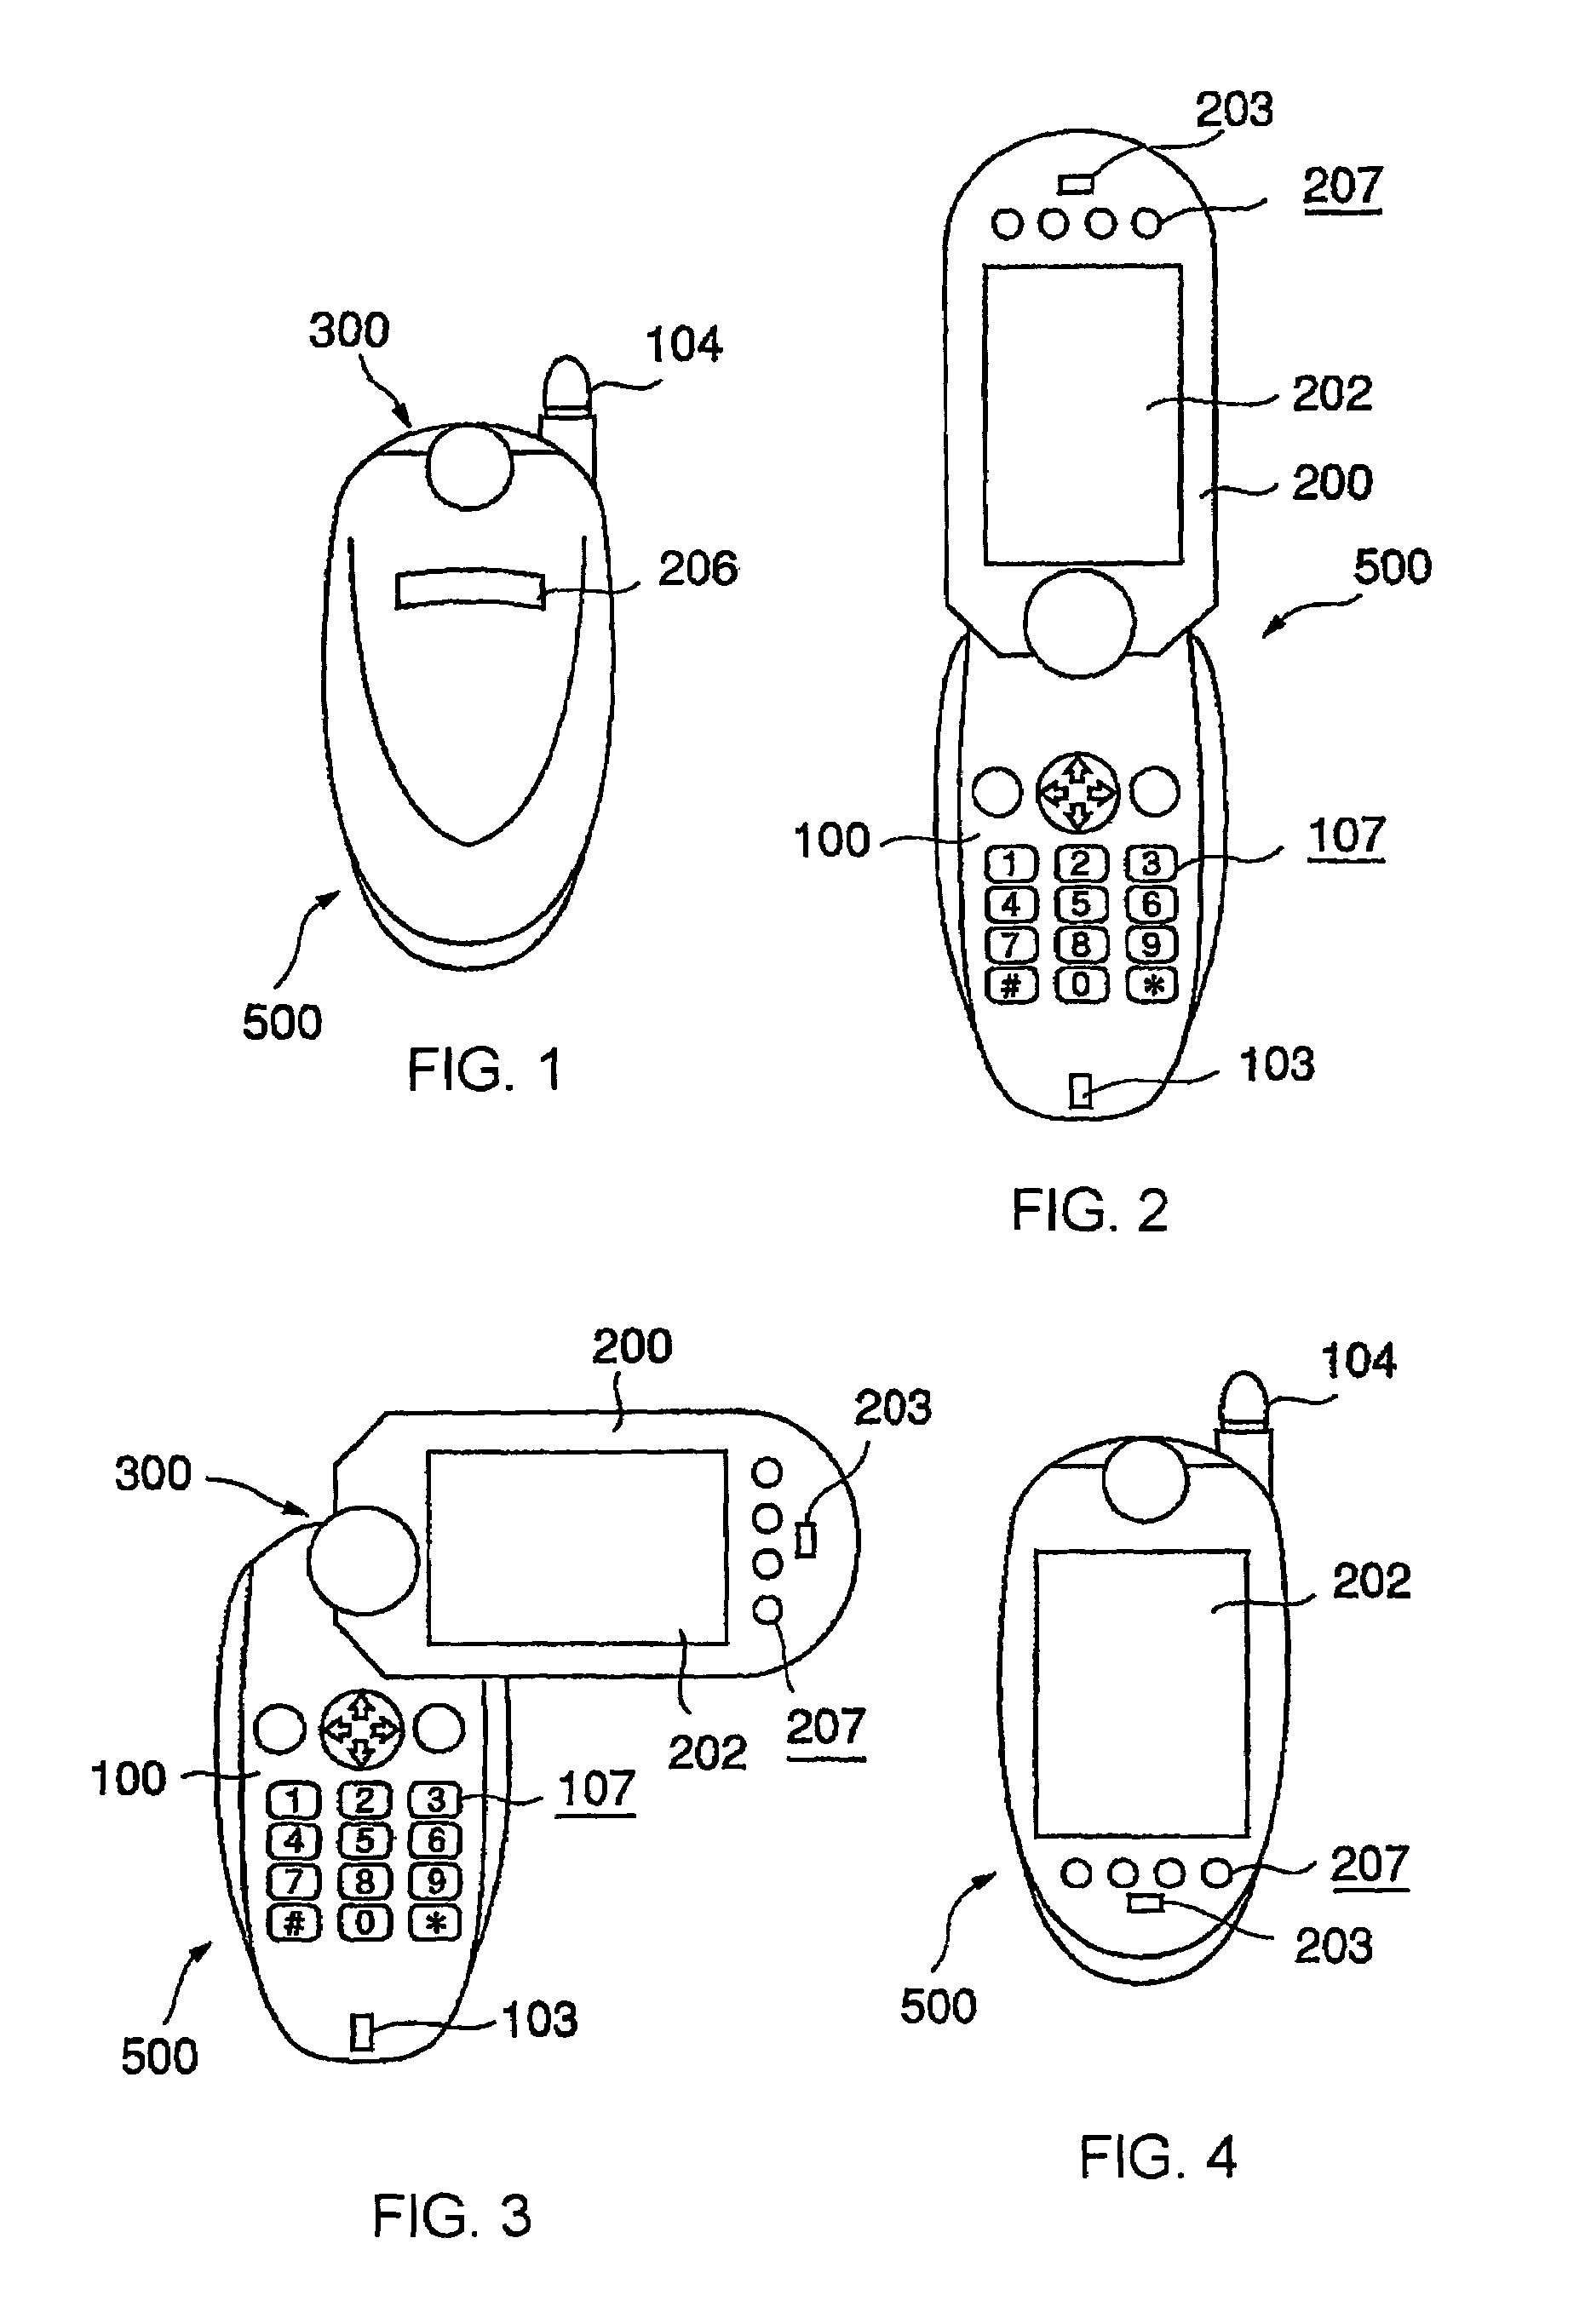 Foldable and portable mobile communication terminal